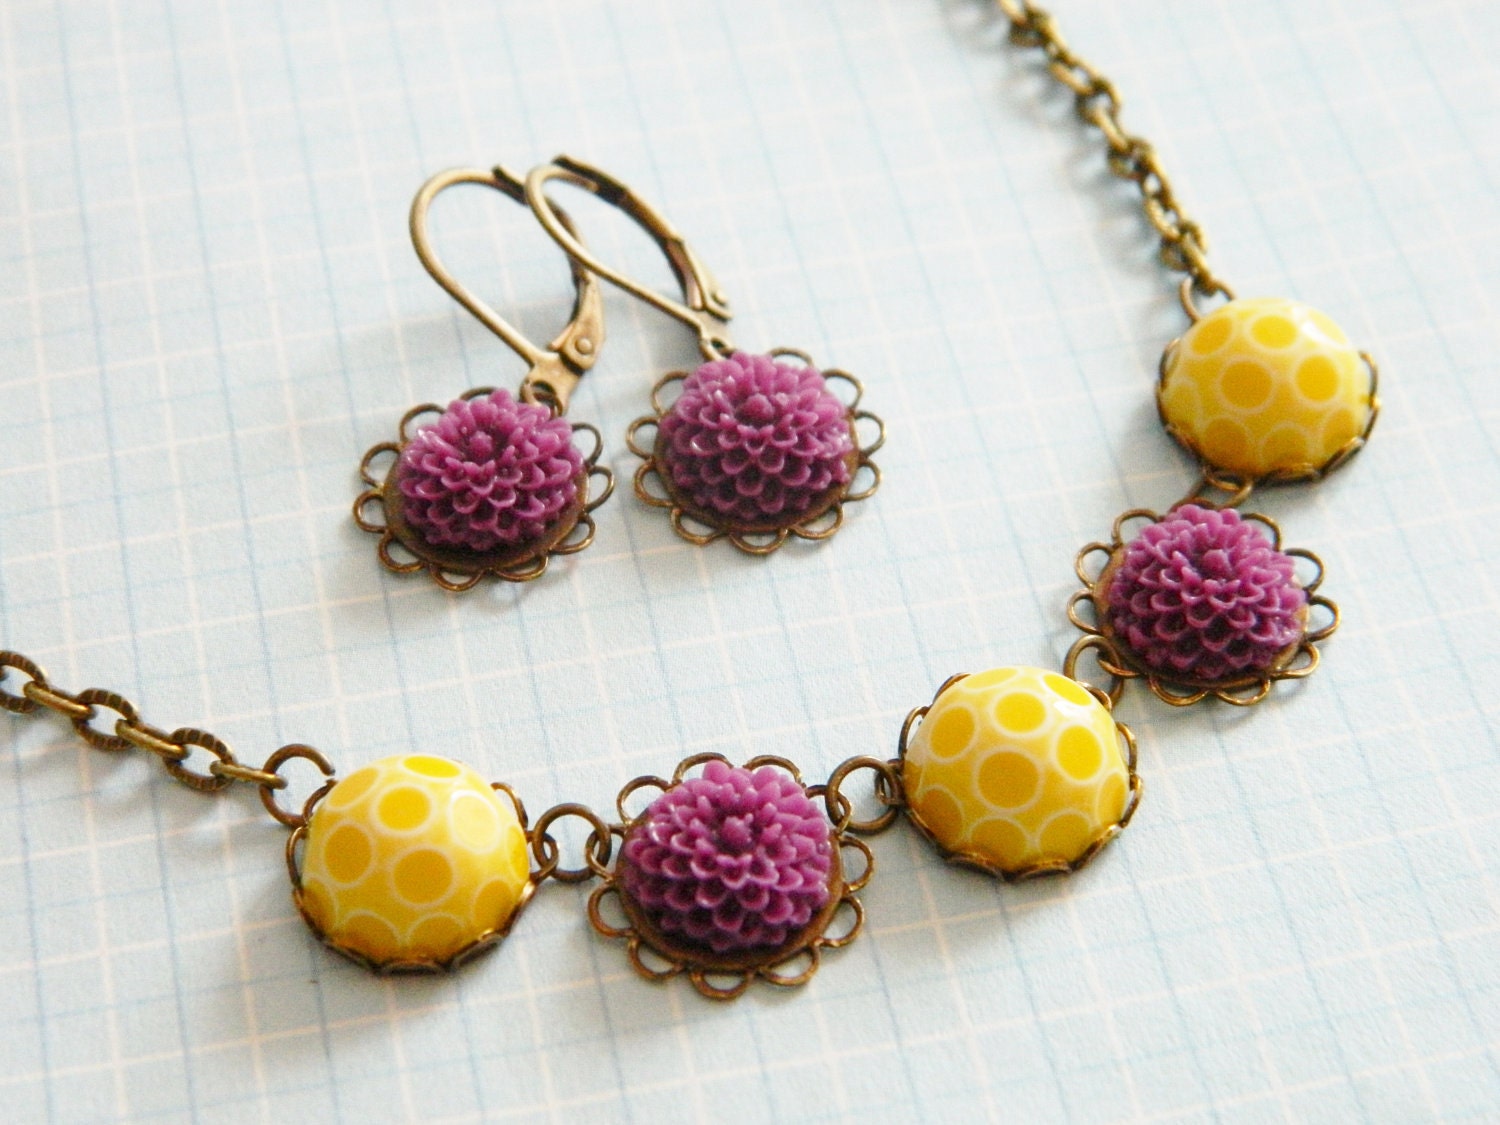 Necklace & Earrings Set Vintage Yellow Honeycomb and Violet Flowers - Sweet Dahlia Honey